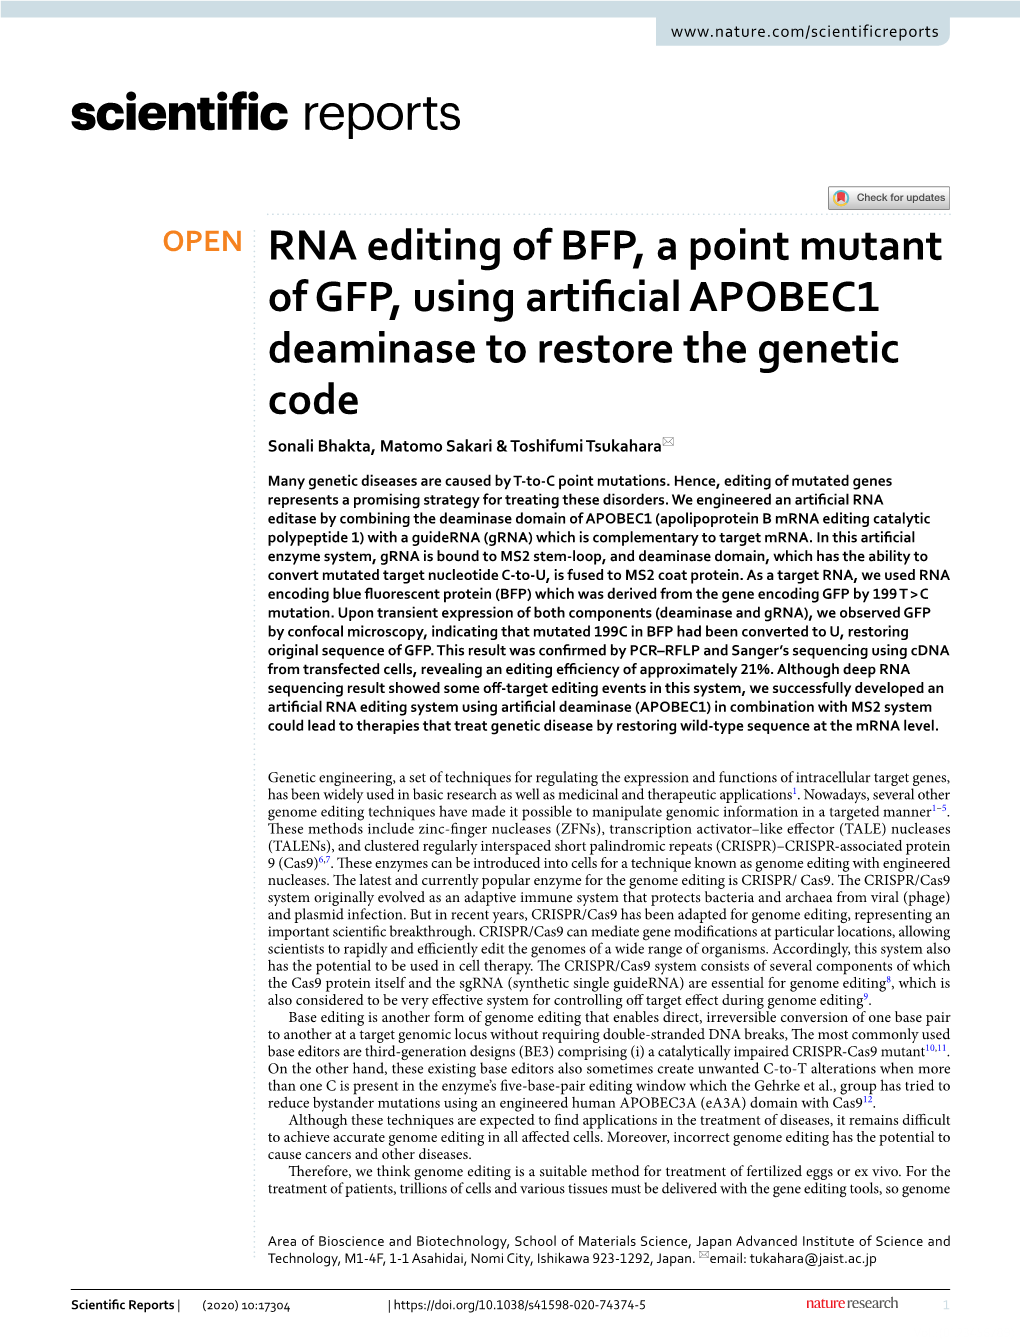 RNA Editing of BFP, a Point Mutant of GFP, Using Artificial APOBEC1